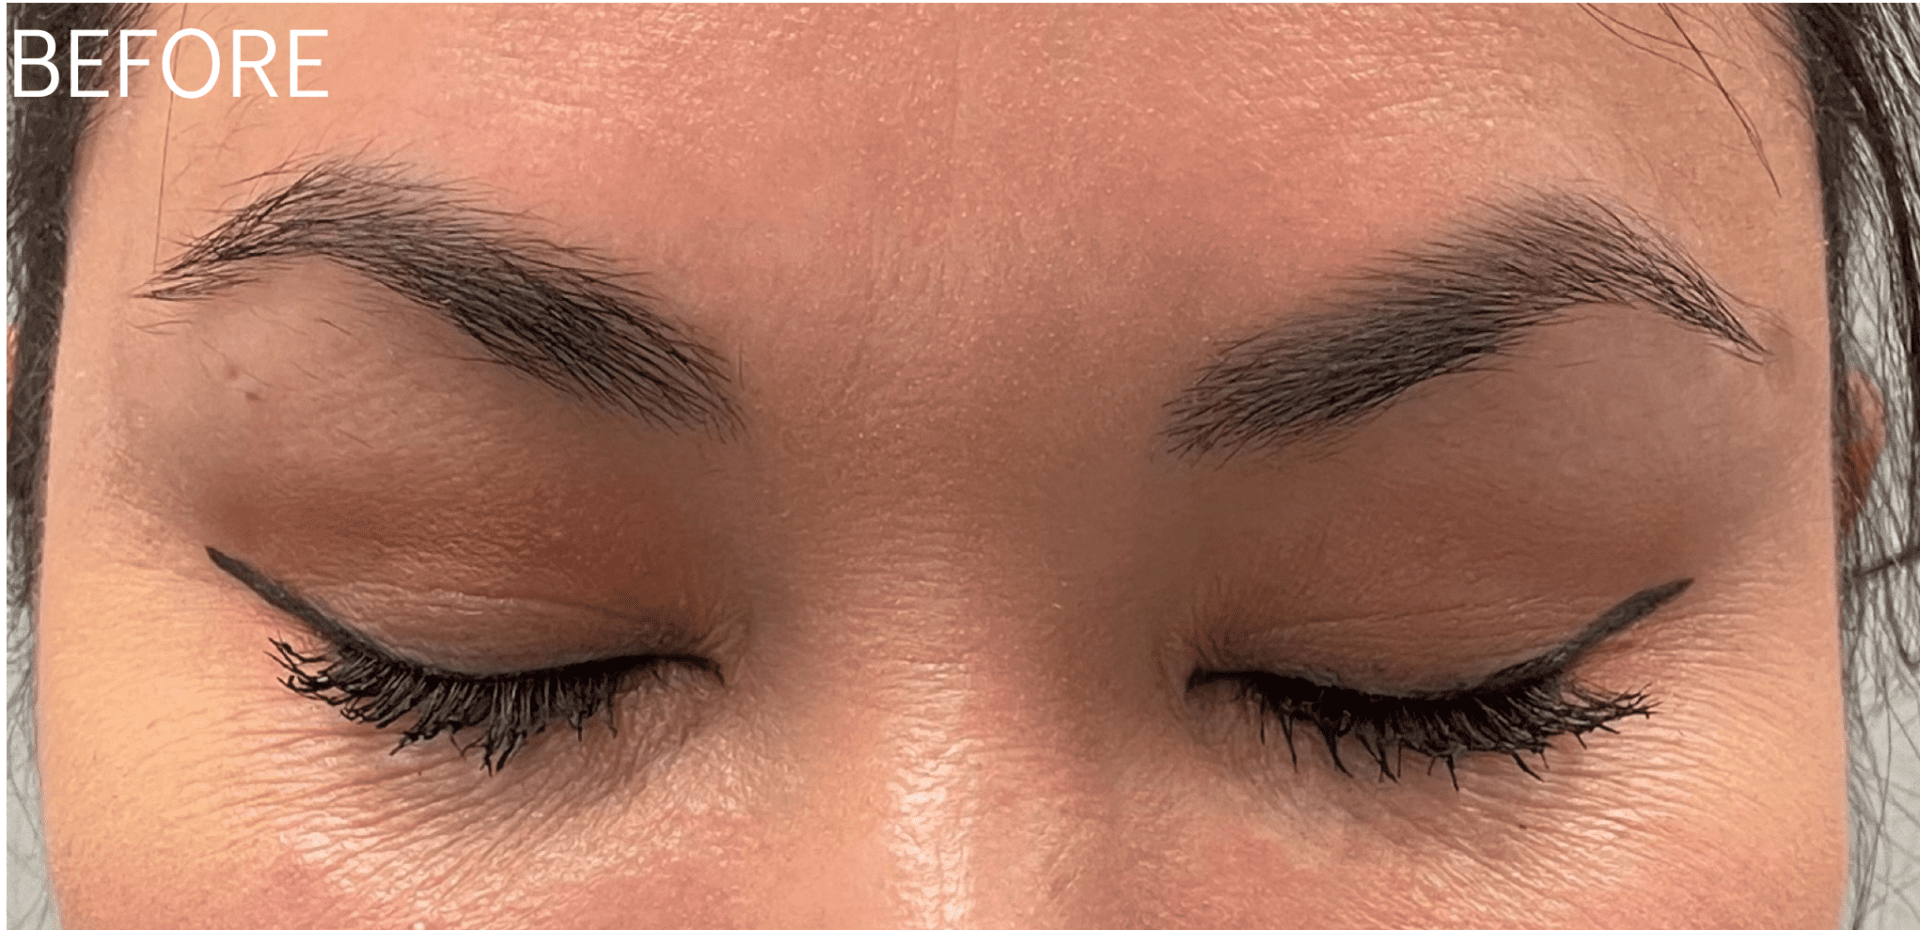 Brow Lamination Before - Spa Services and Spa Treatment in Birmingham | Spa Cahaba